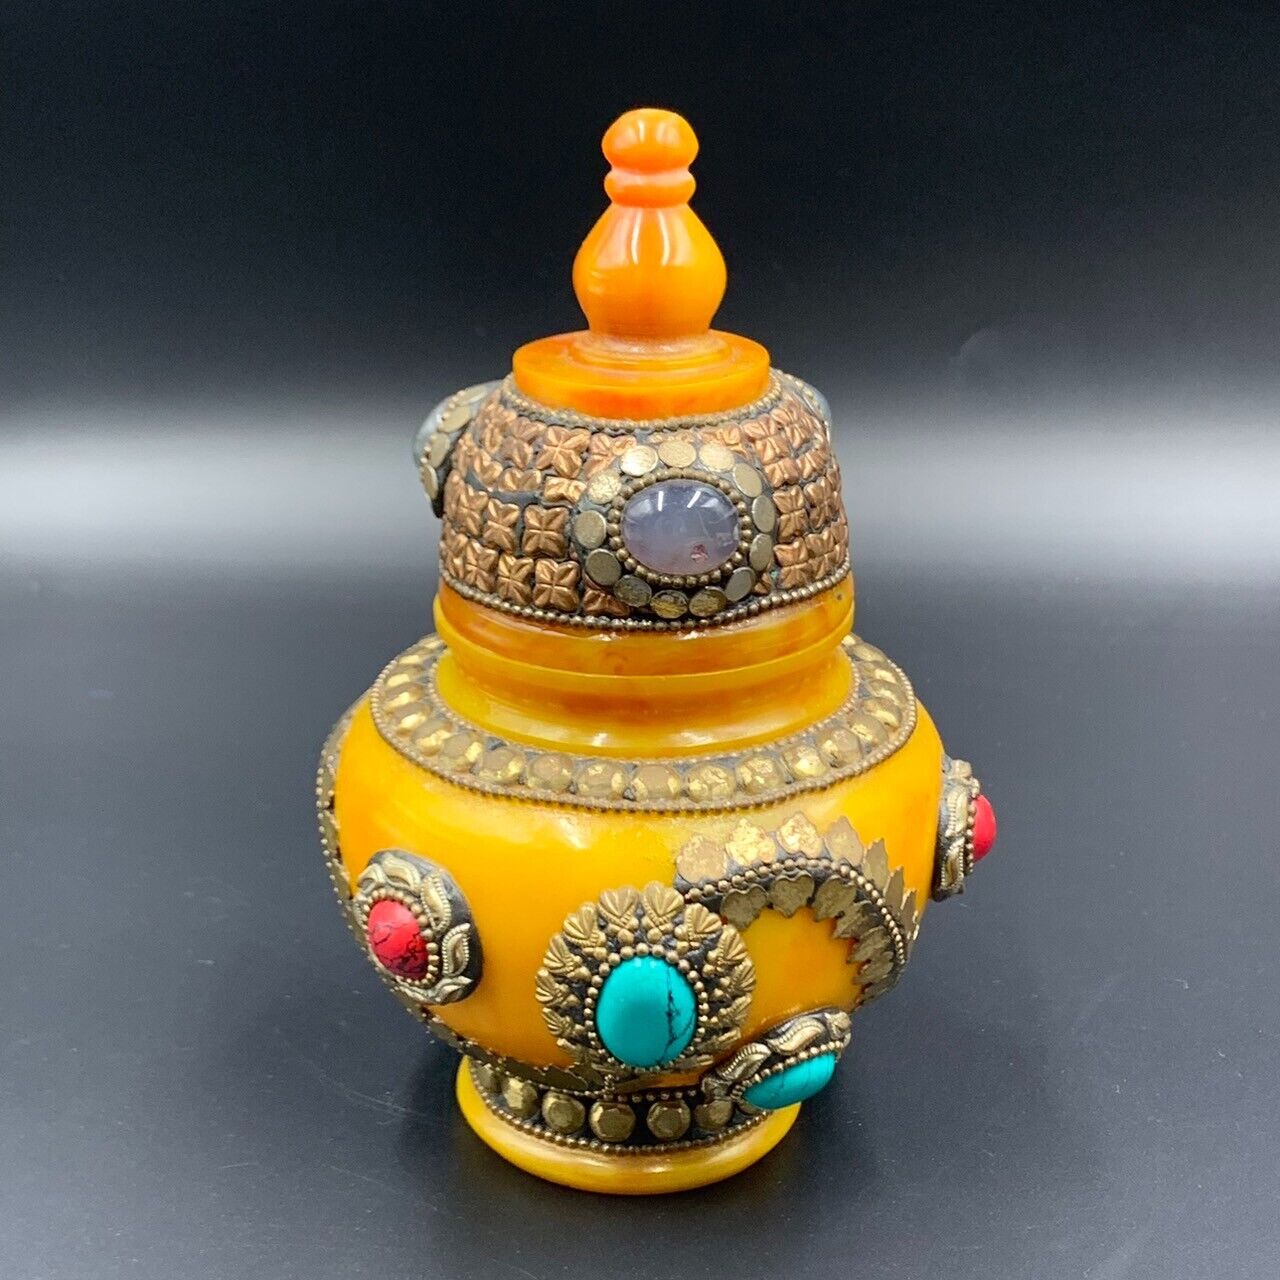 Vintage Handmade Old Nepalese Amber Jewel Jar With Agate Stones, Collectible - Image 5 of 5